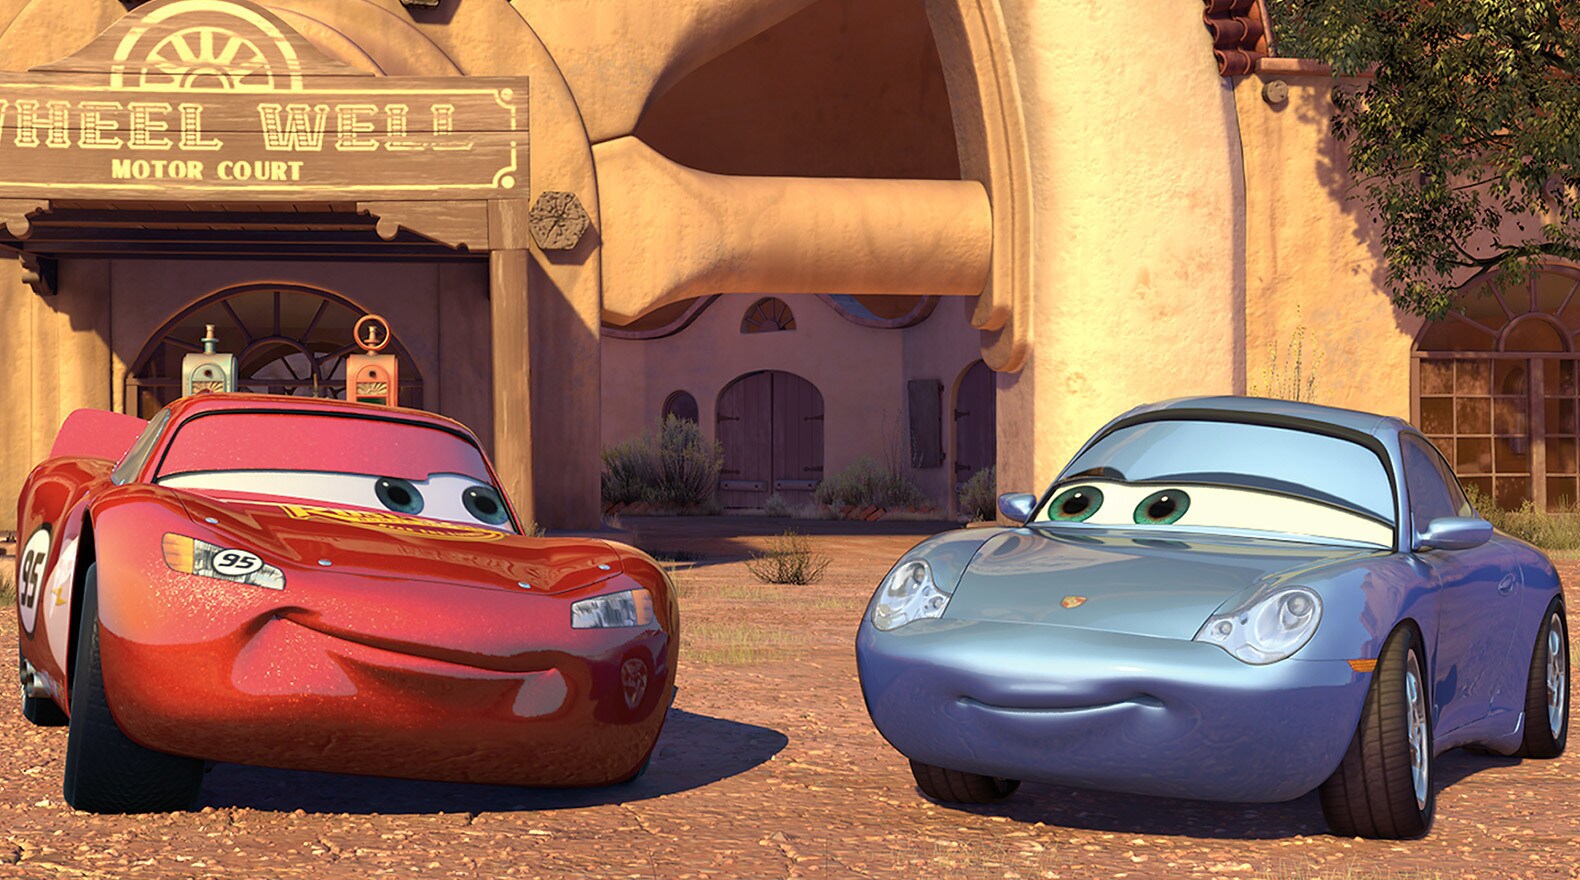 "I'm gonna cut to the chase. Me, you, dinner. Ka-chow!"